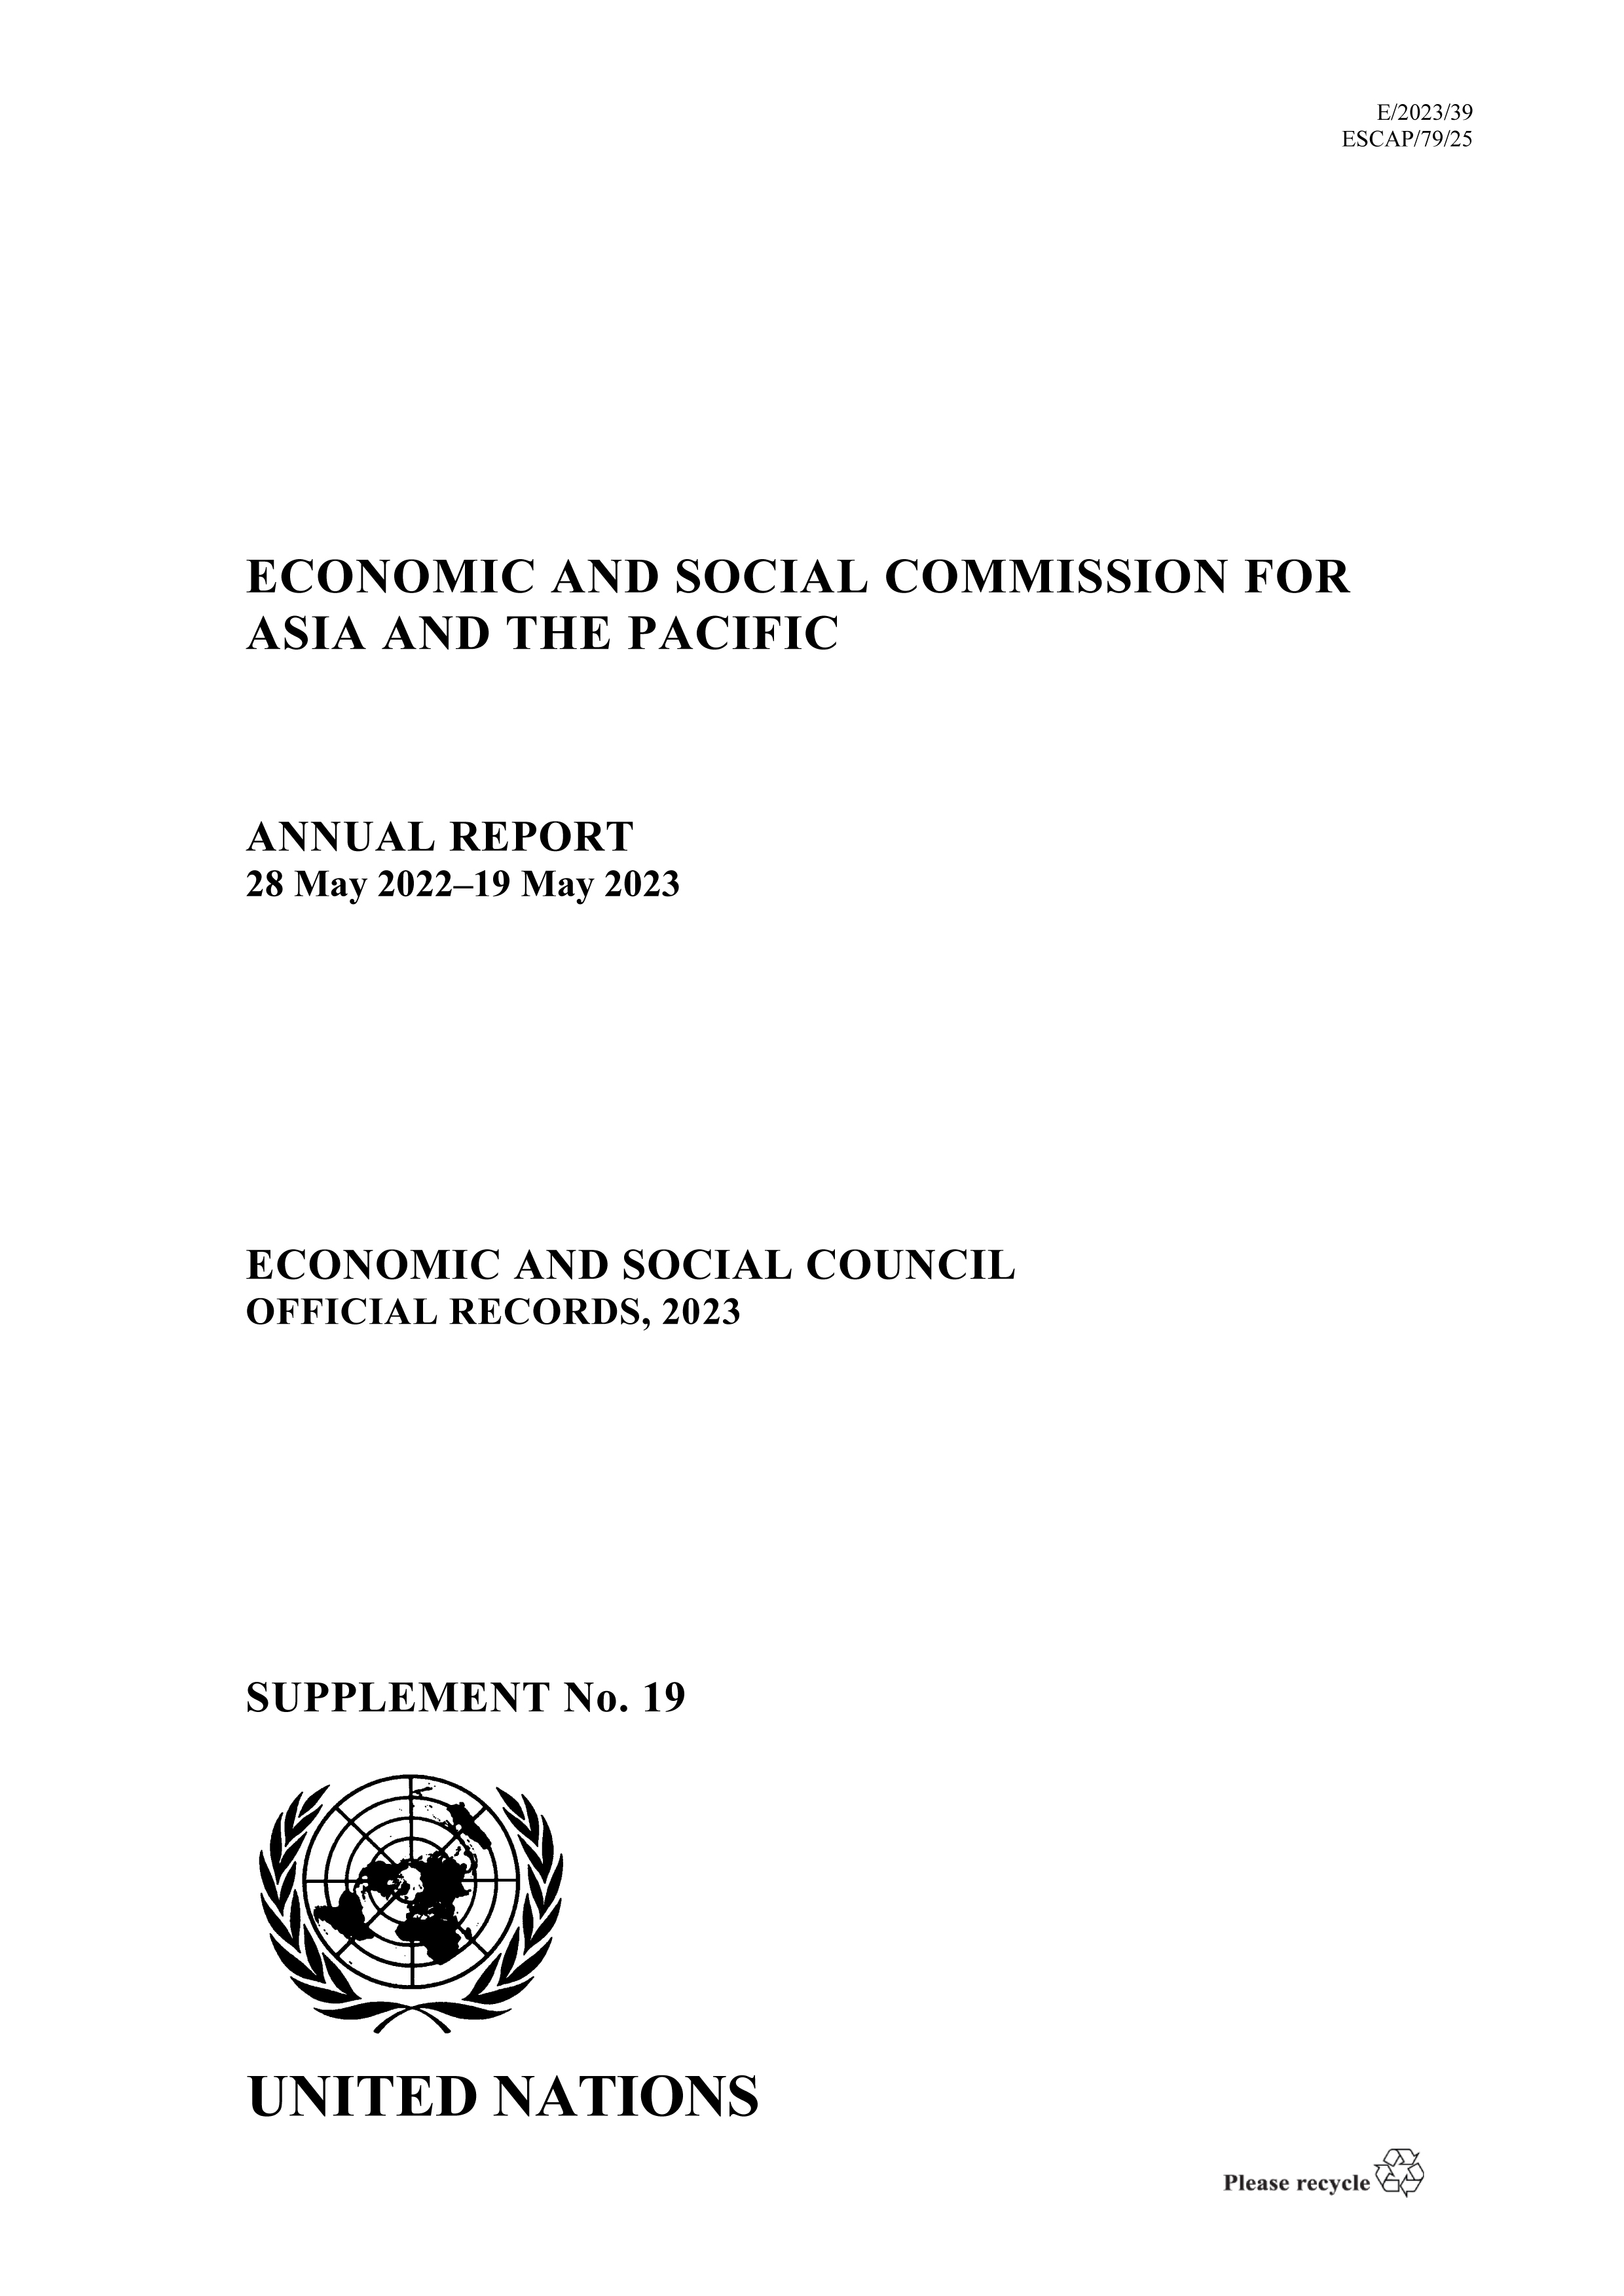 image of Annual Report of the Economic and Social Commission for Asia and the Pacific 2023